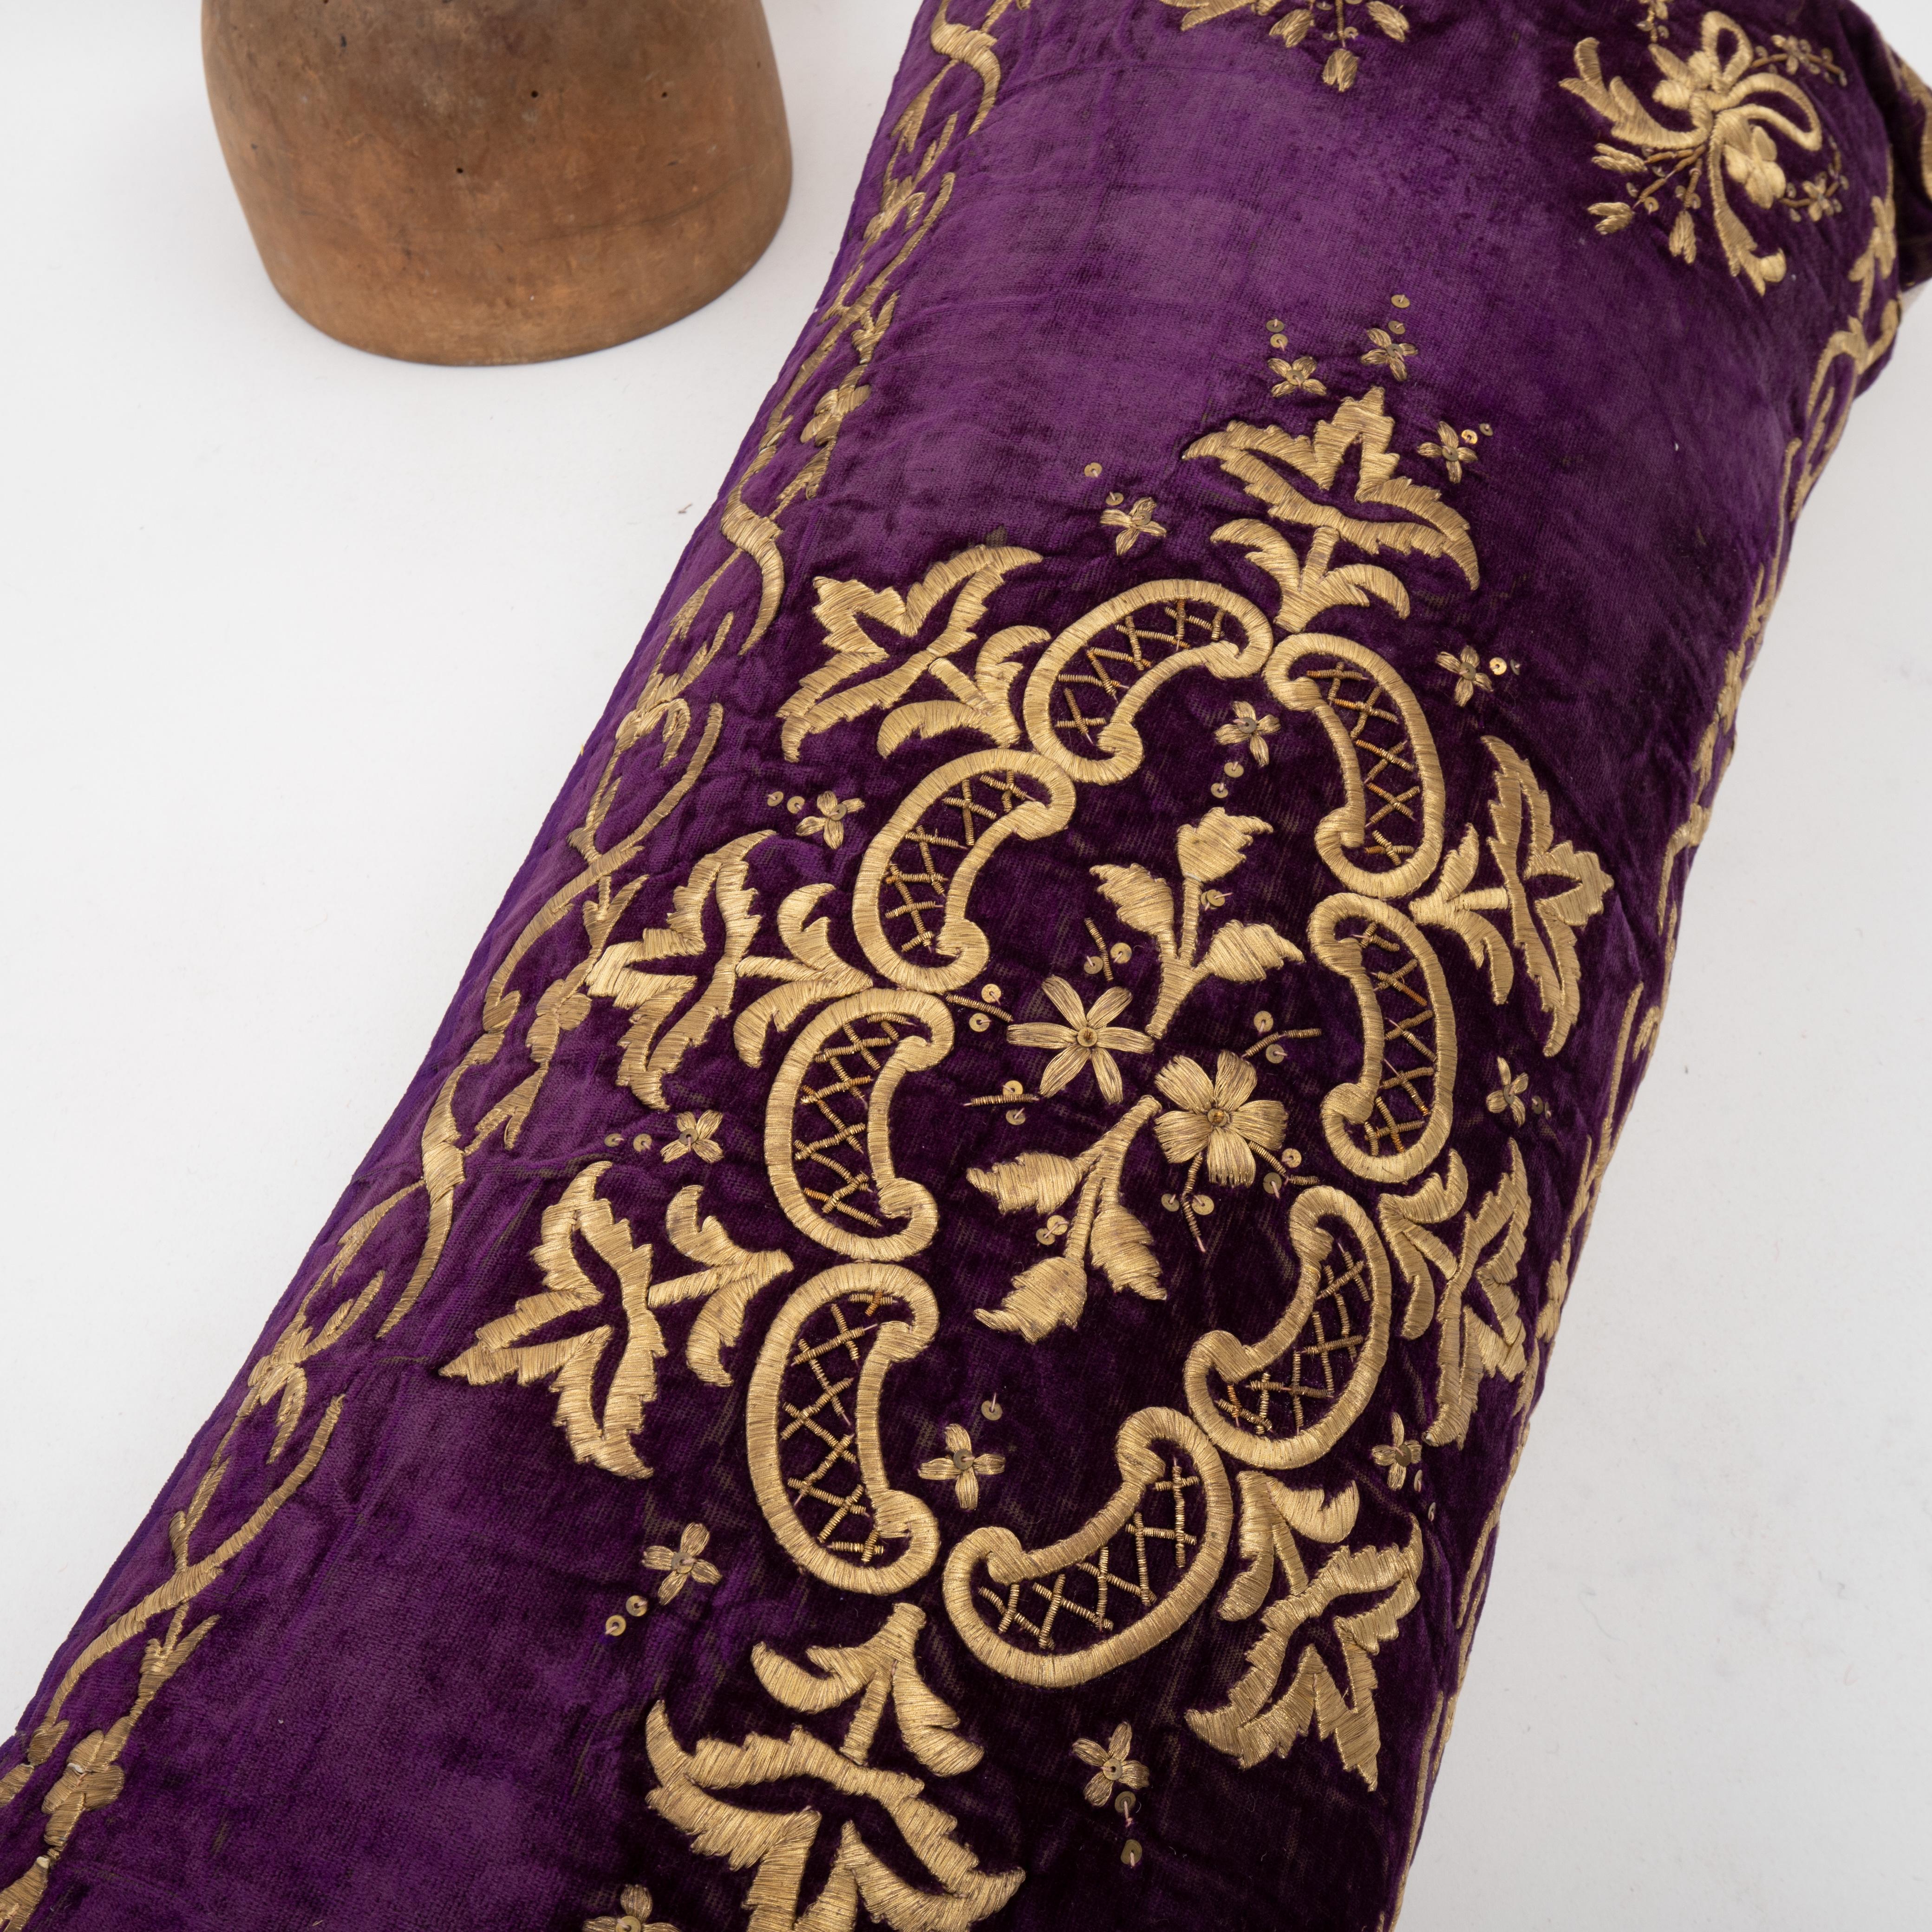 Ottoman / Turkish Pillow Cover in Sarma Technique, late 19th / Early 20th C. For Sale 1